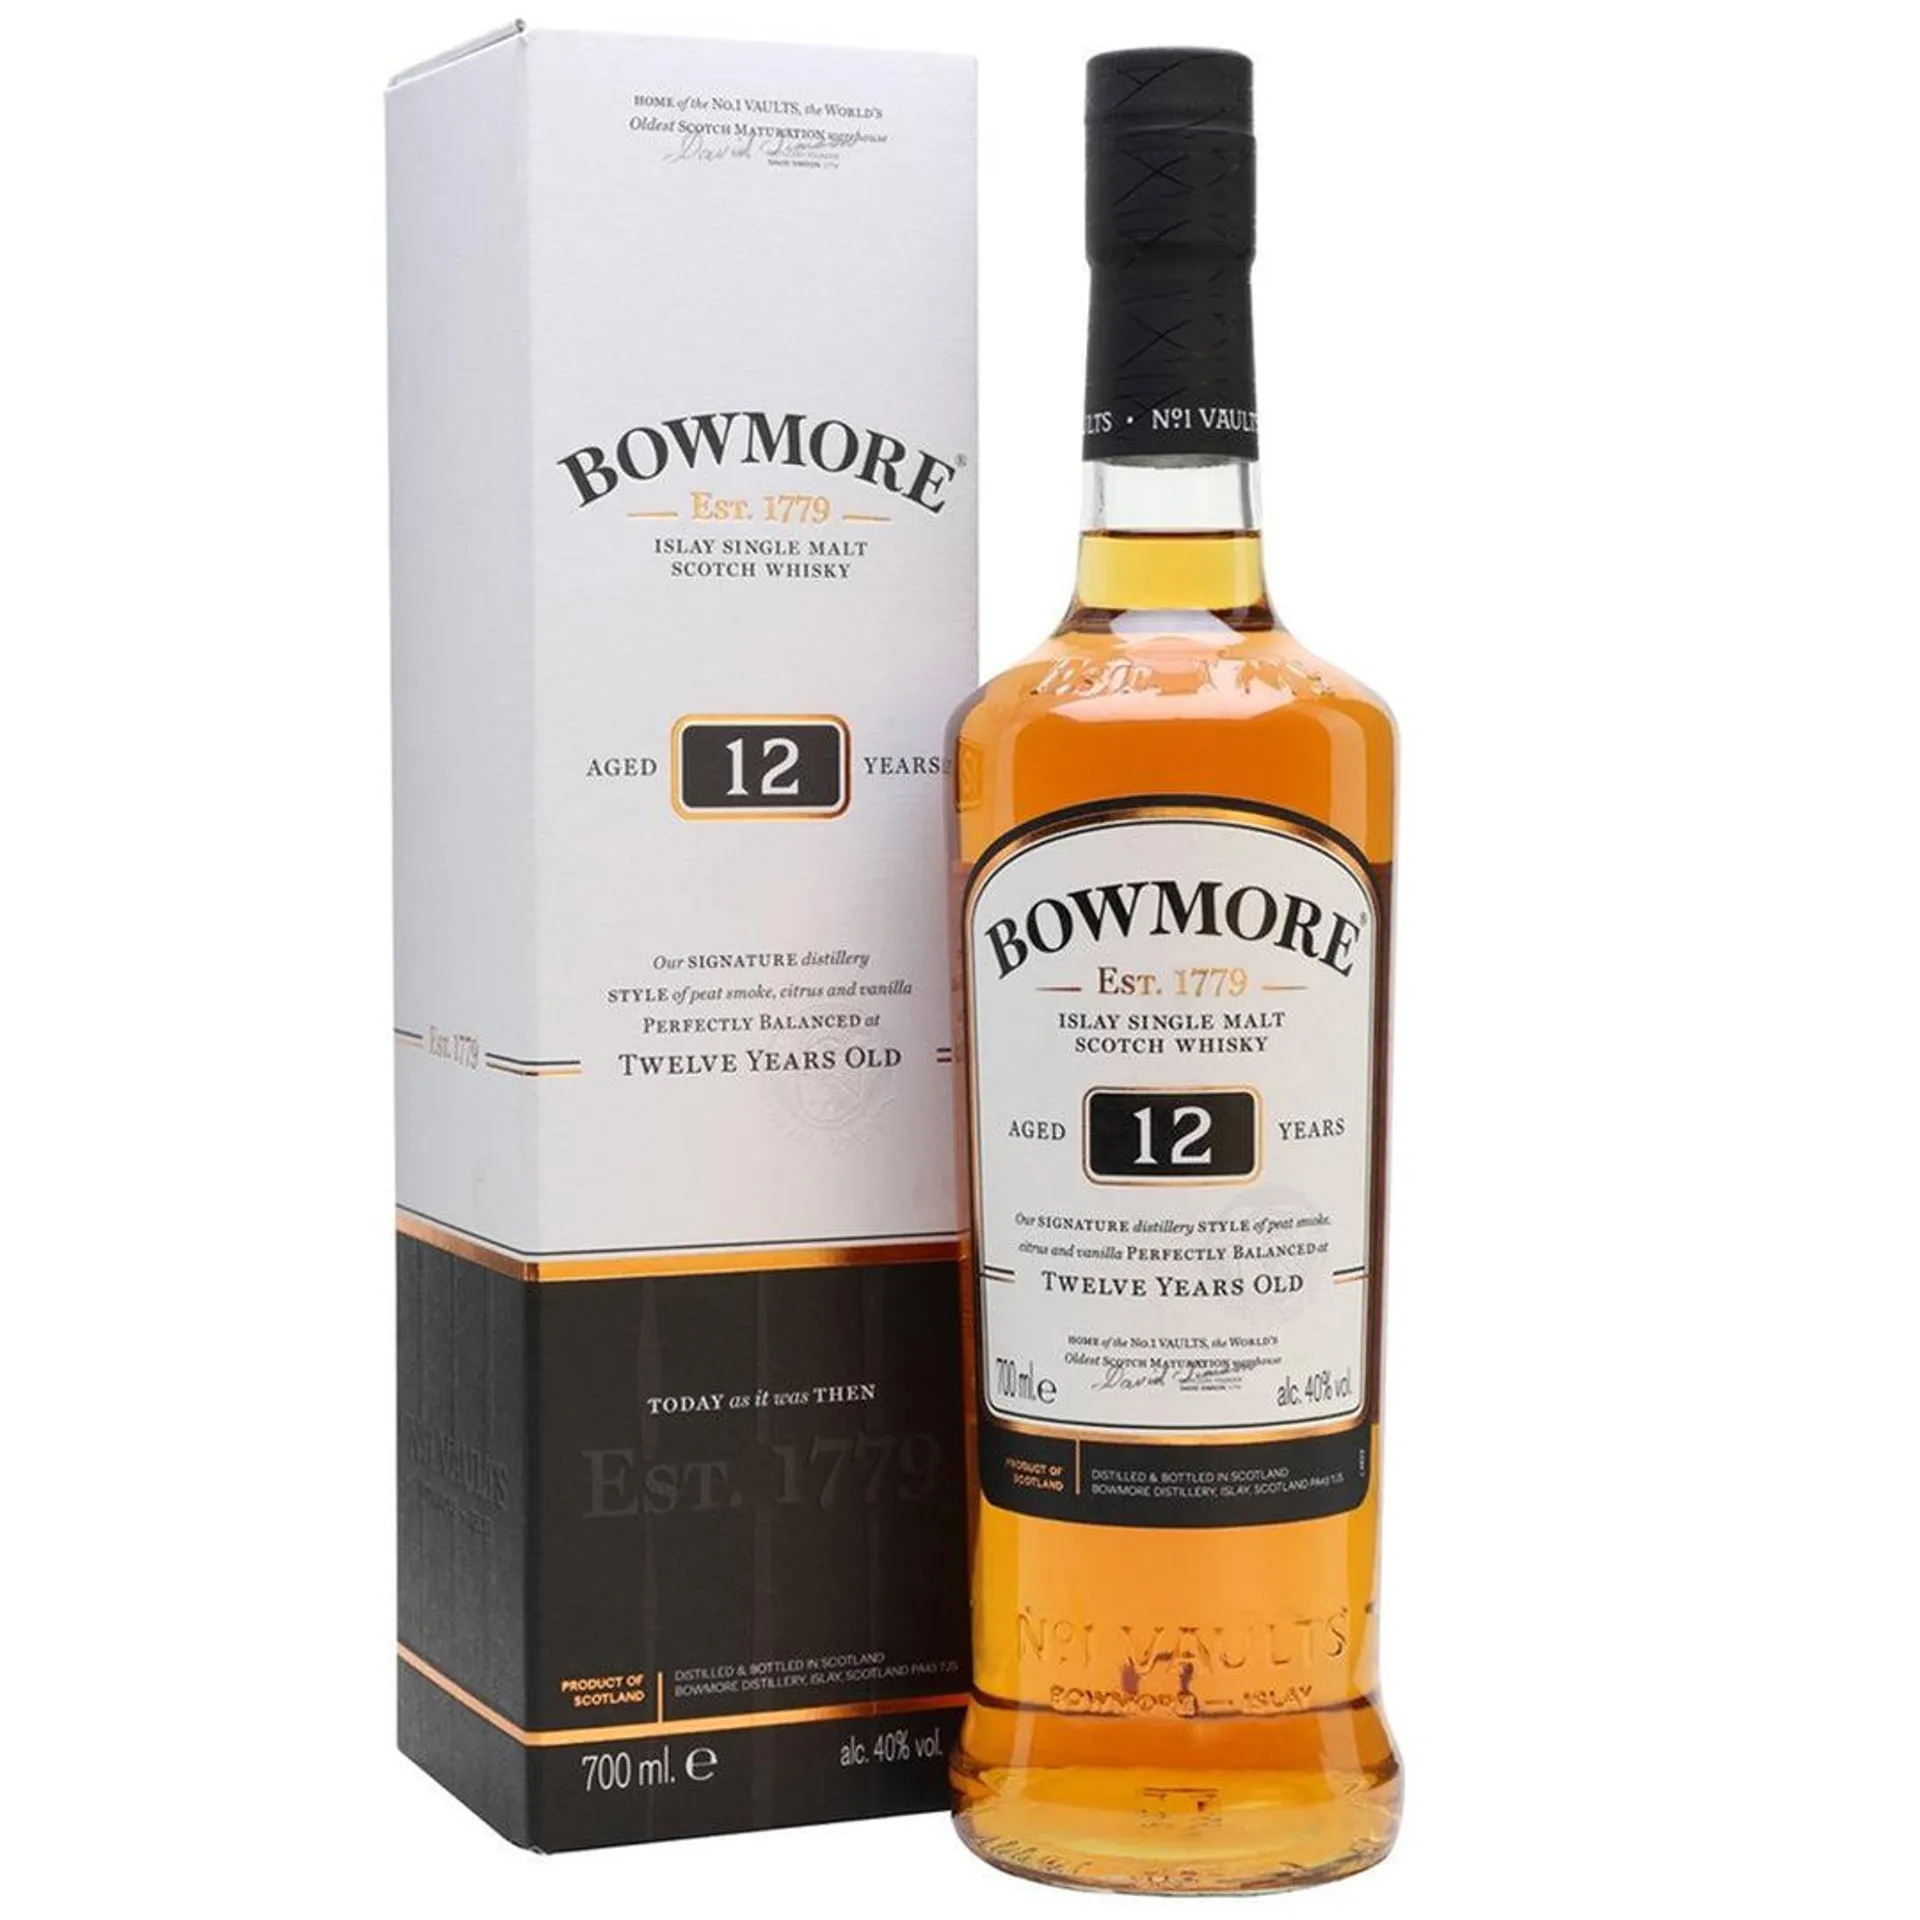 WHISKY BOWMORE 12 YEARS